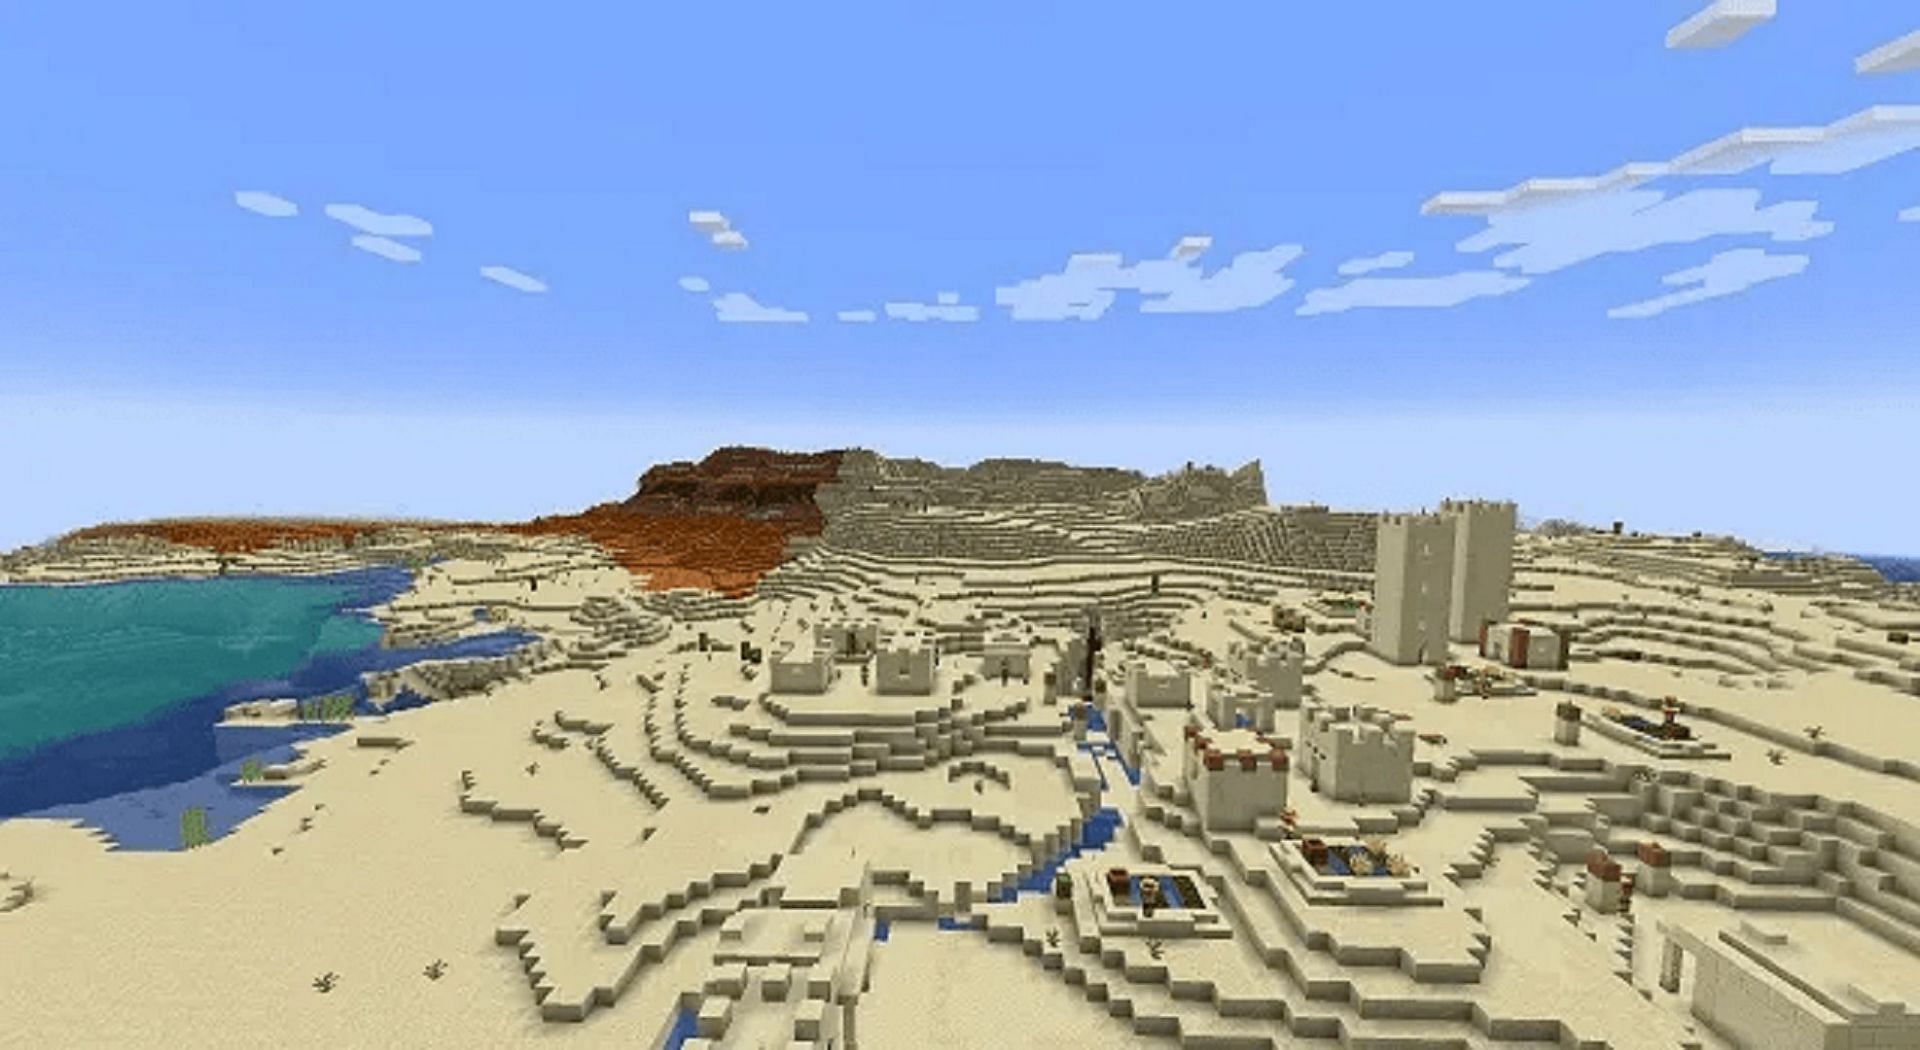 This seed may start in a desert, but it has plenty to offer (Image via Mojang)